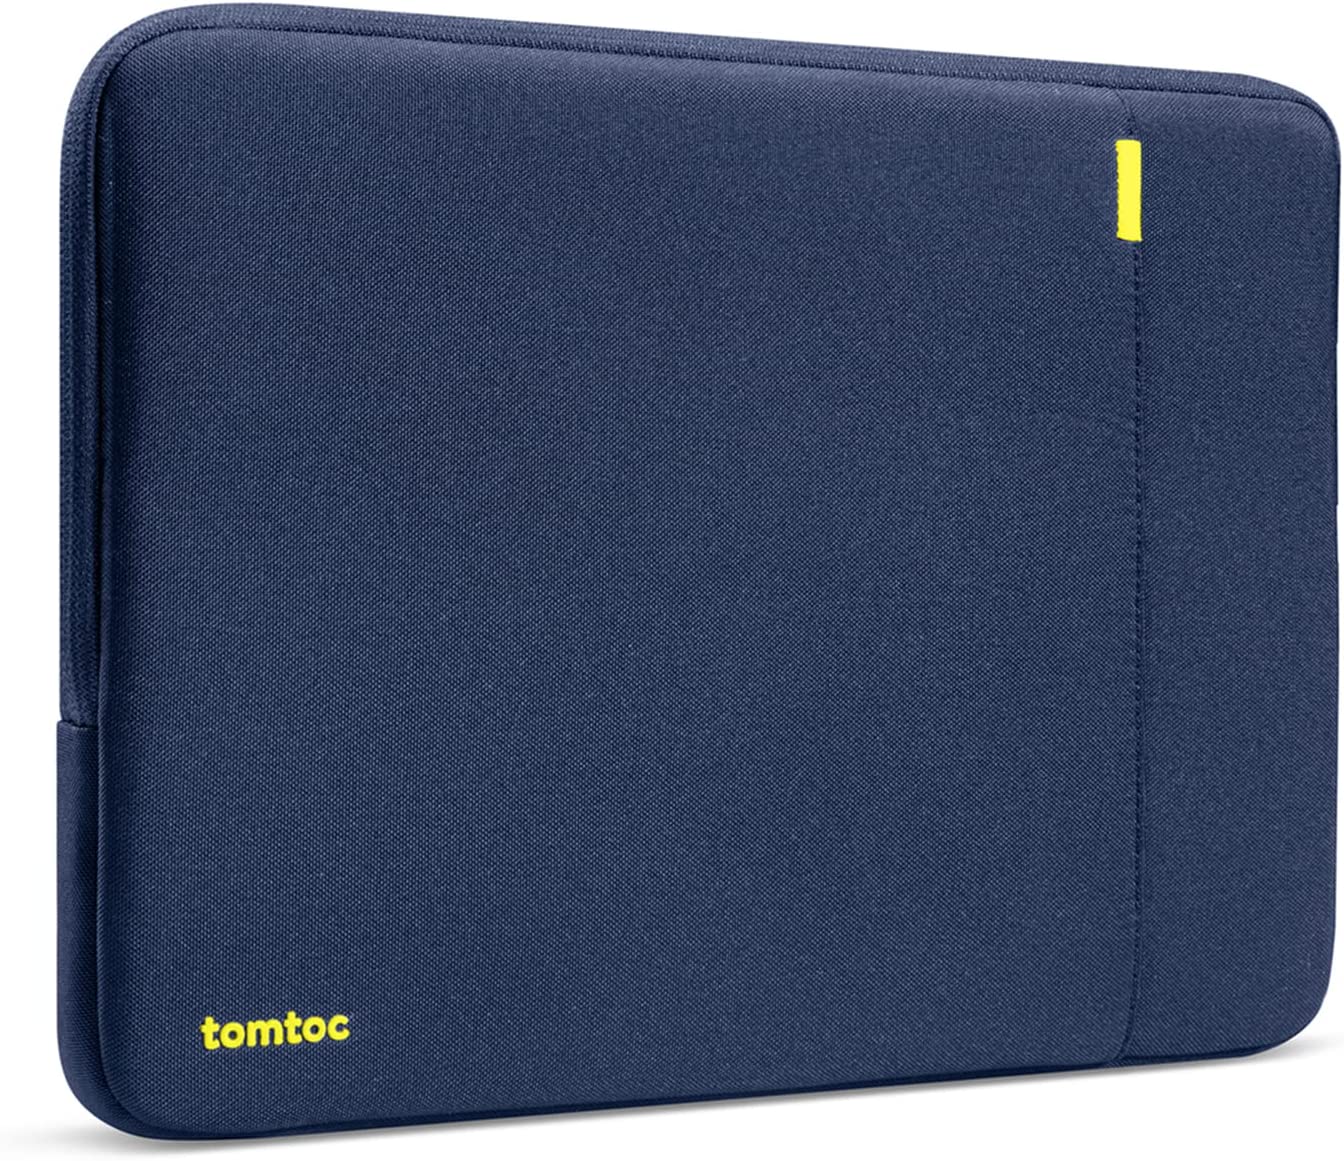 Tomtoc Defender-A13 Laptop Sleeve for 14-inch - Navy Blue